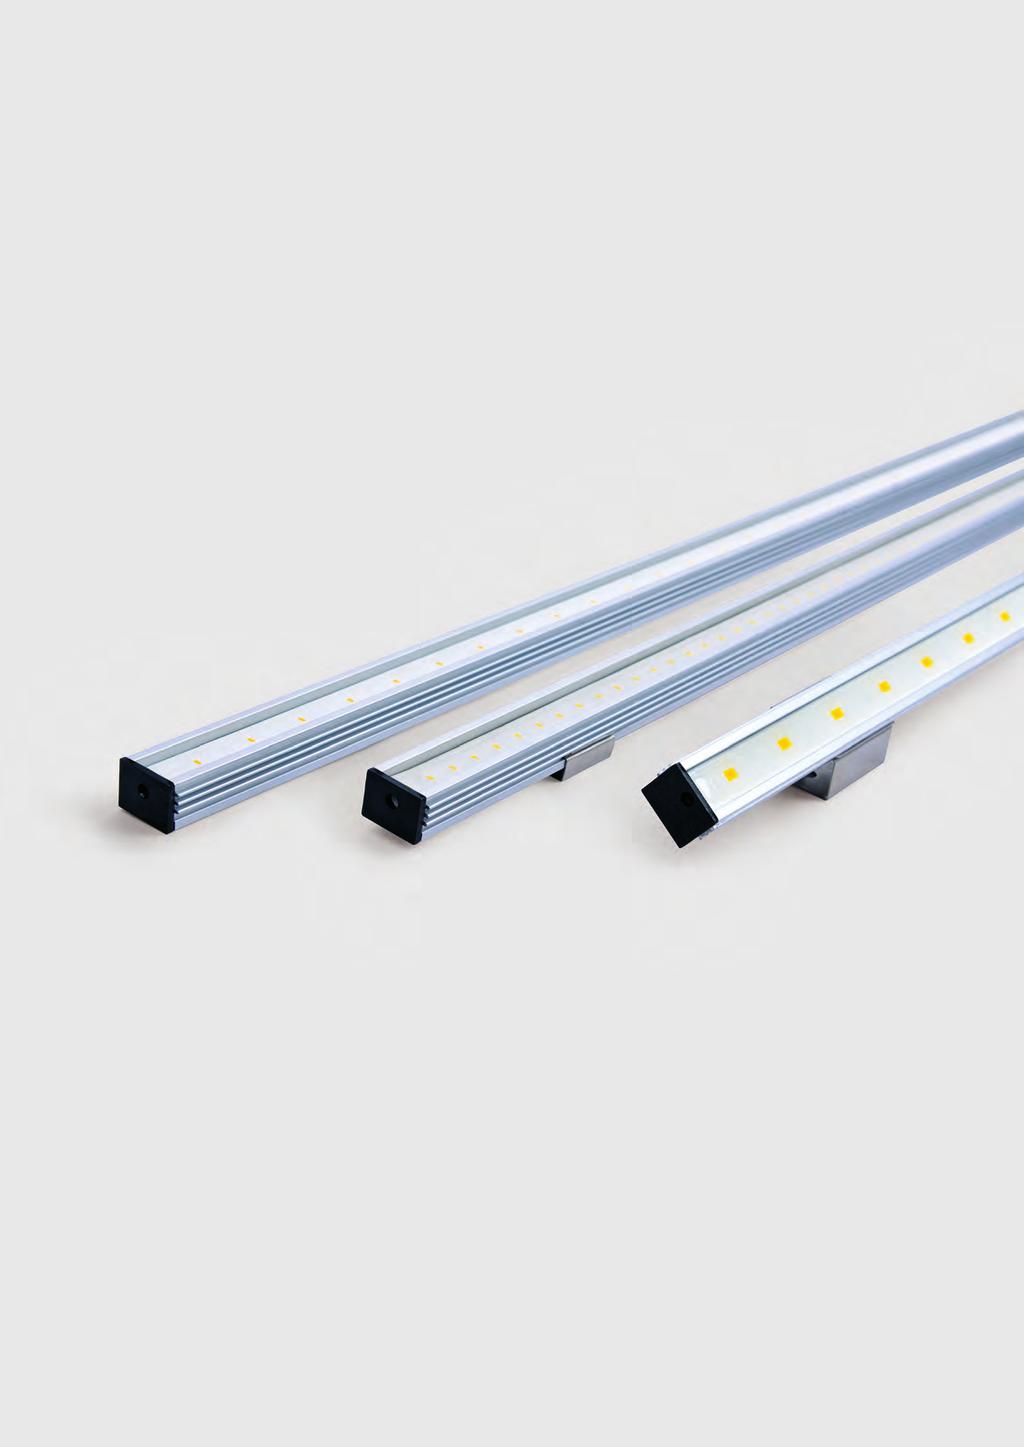 LINEARlight Flex Protect OSRAM의 Outdoor 전용 Flexible LED